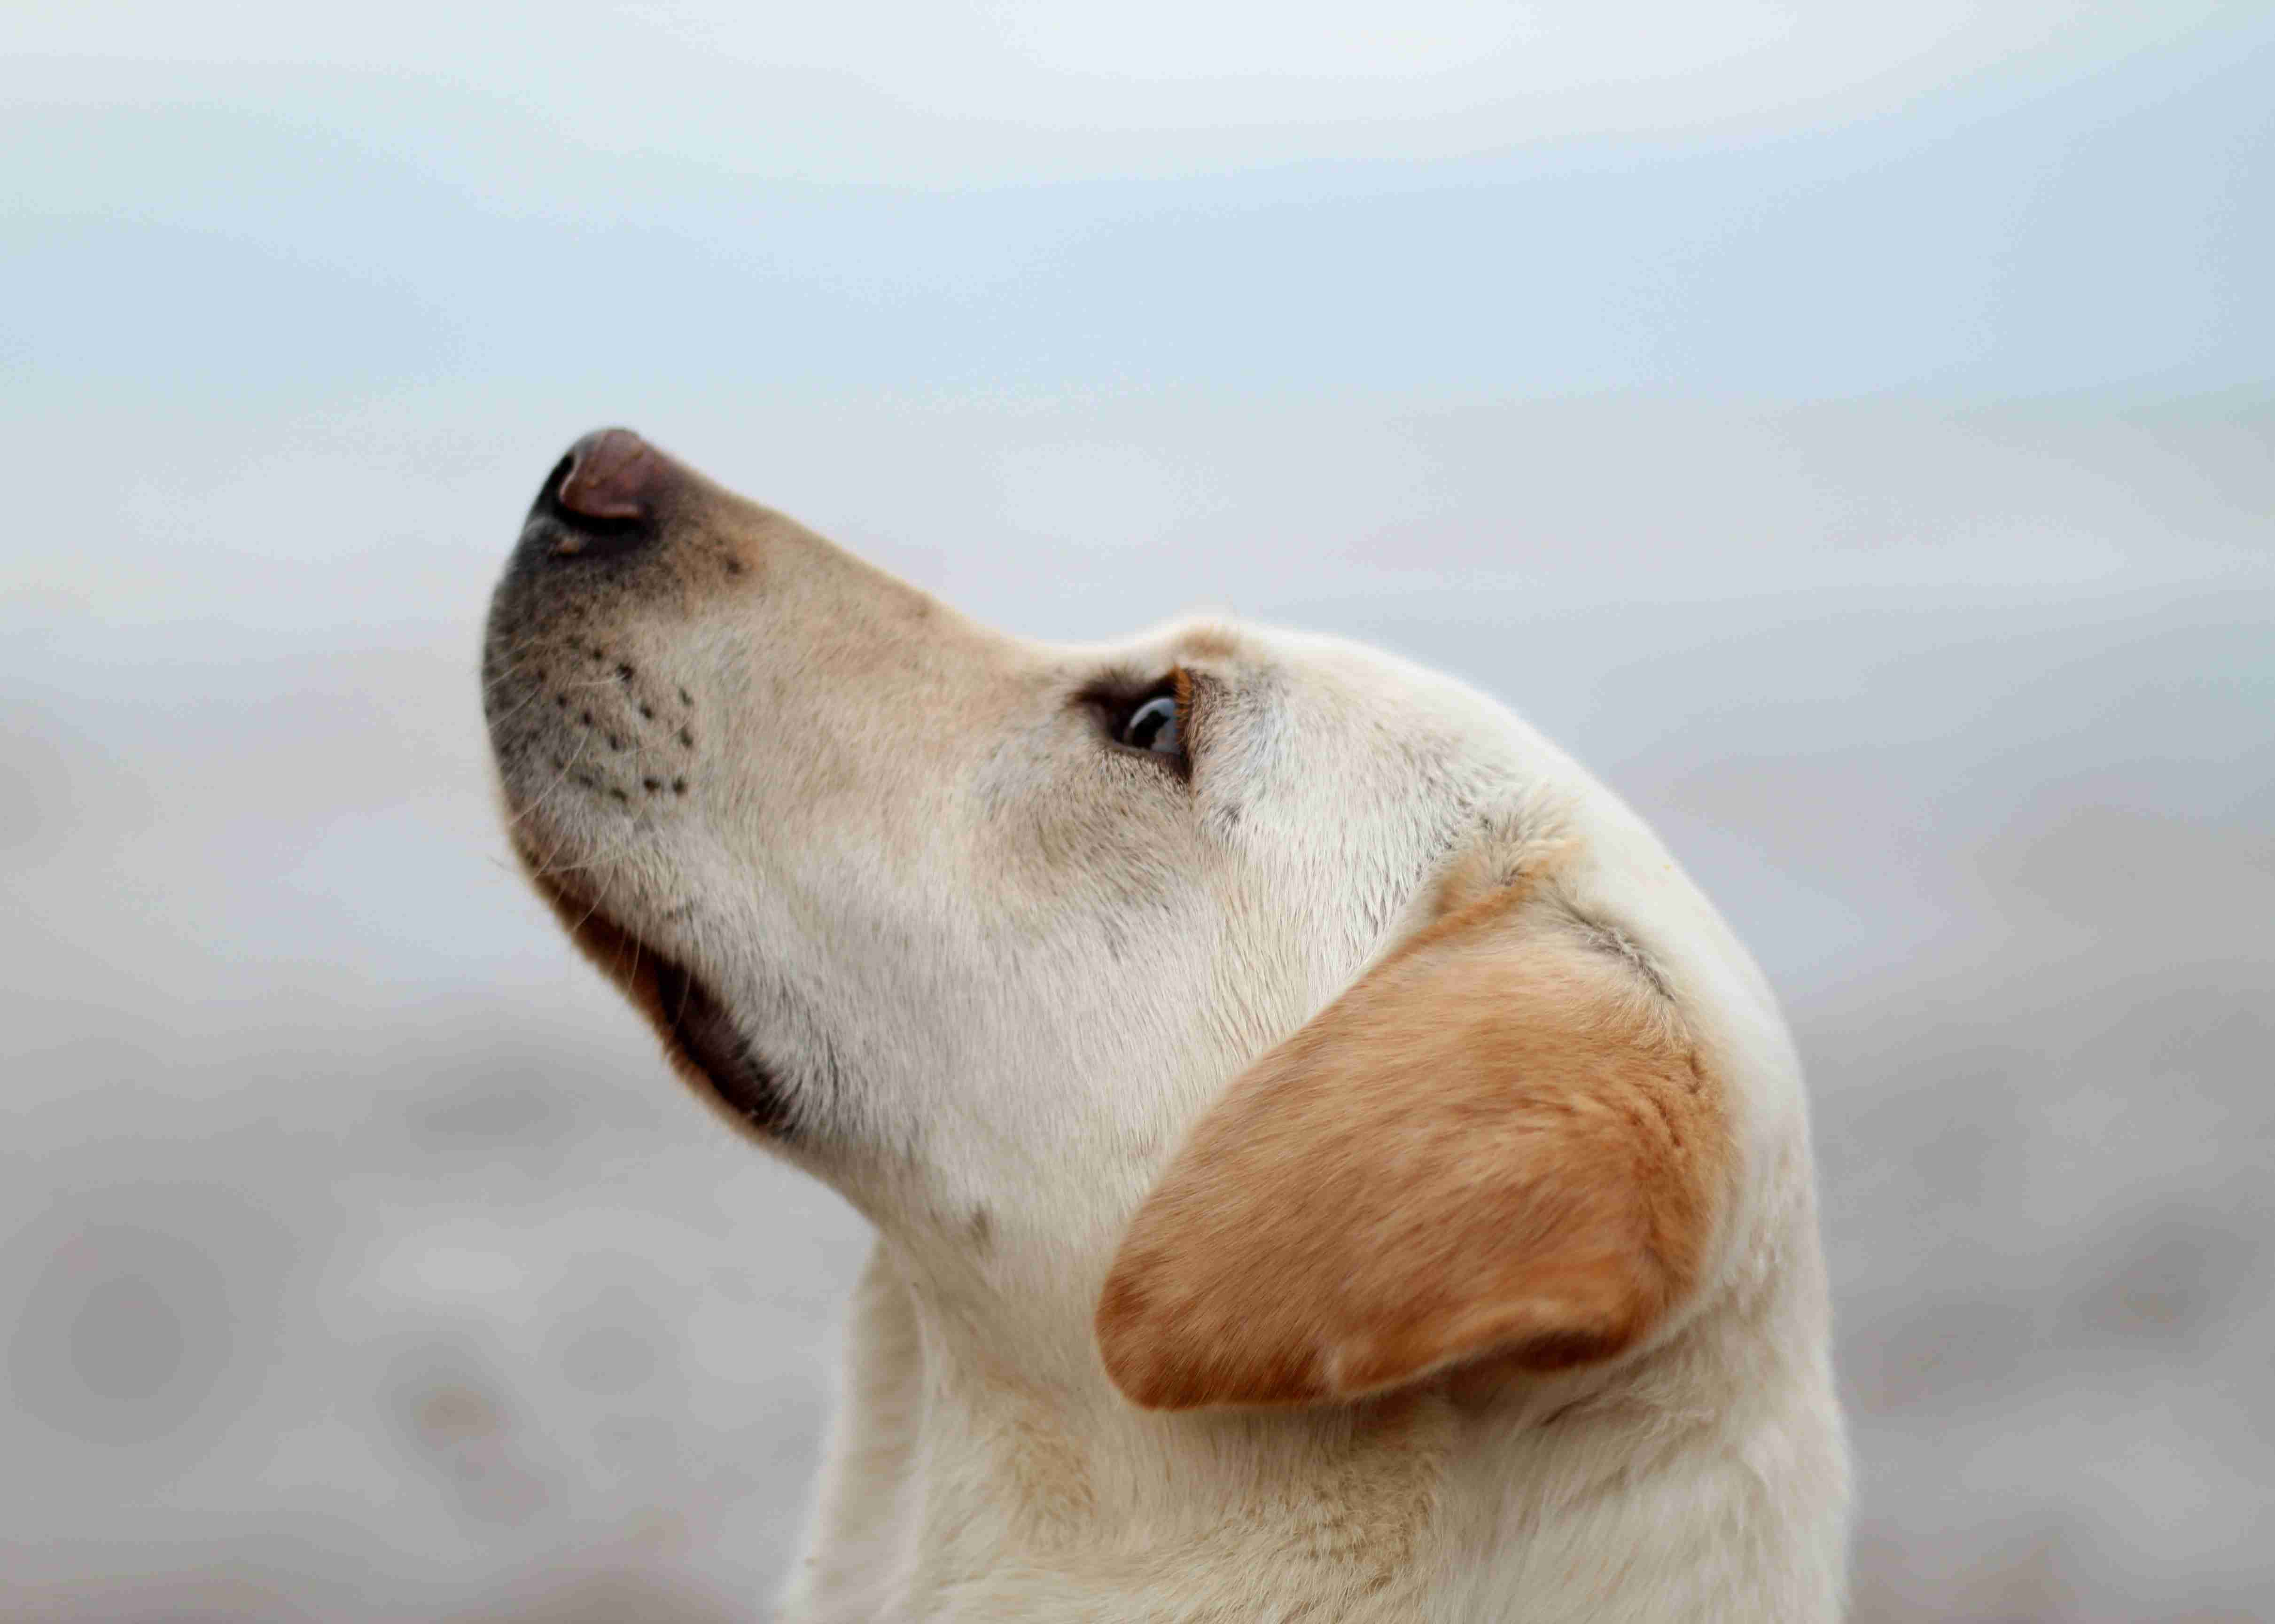 Boosting Your Golden Retriever's Health: Tips for Managing Slow or Fast Metabolism